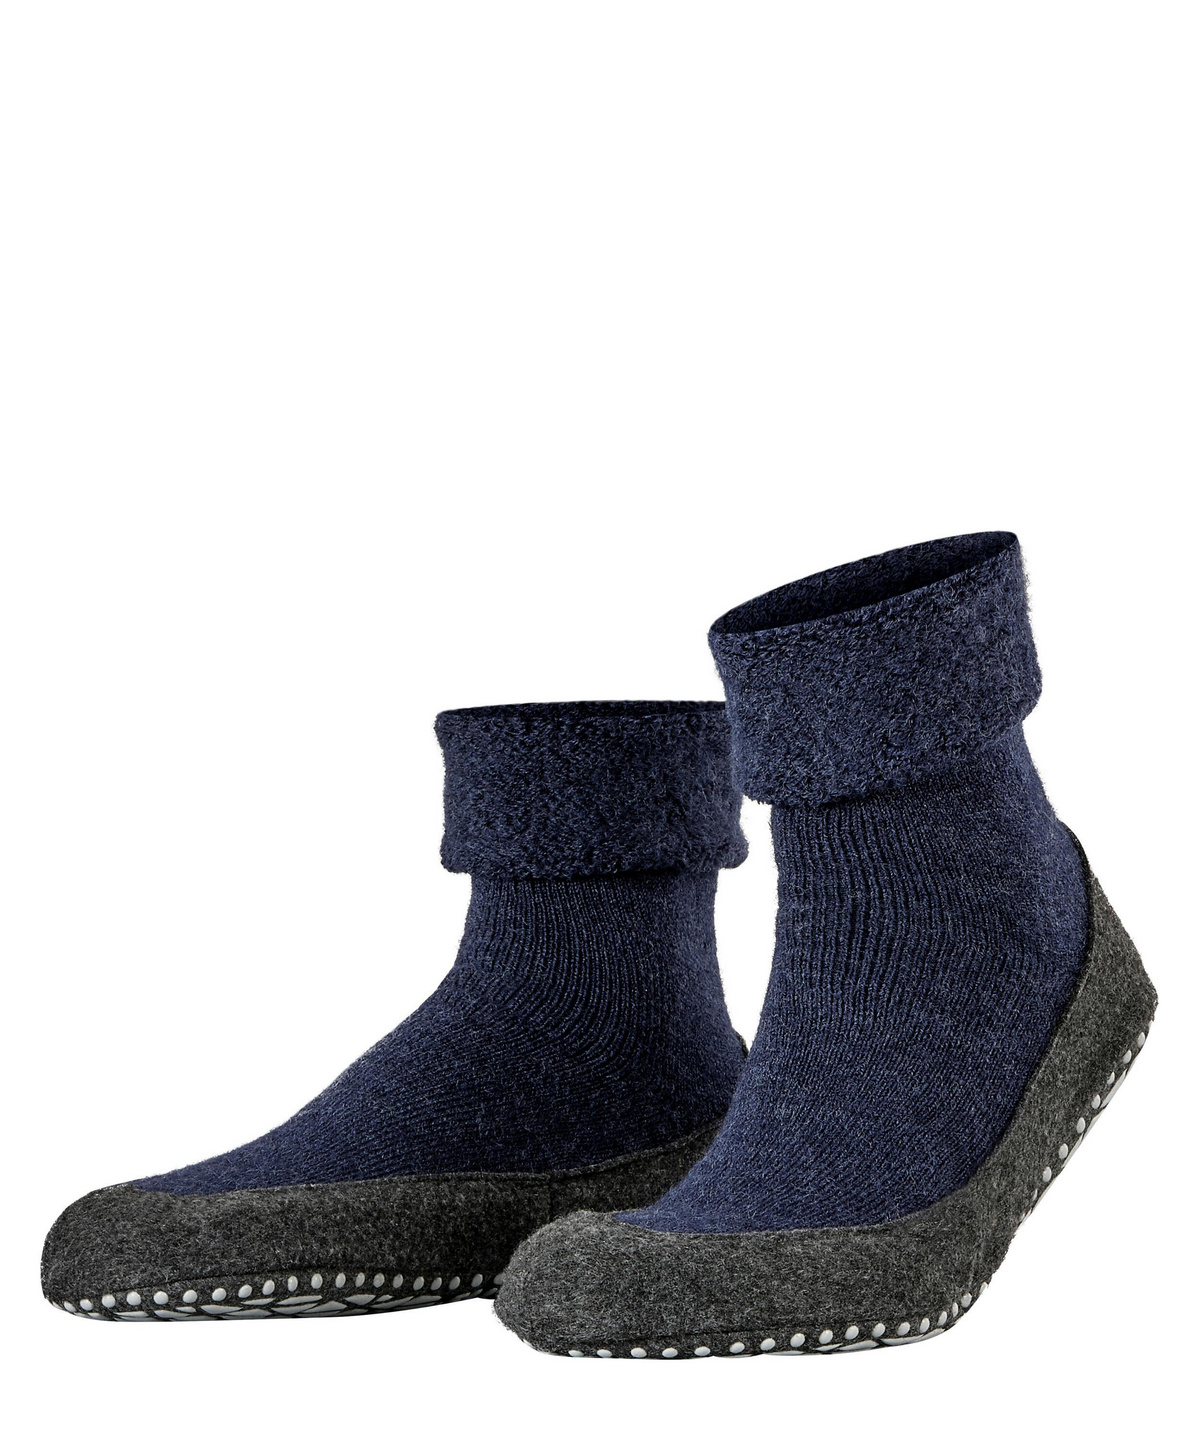 FALKE Unisex Kid's Cosyshoe Slipper Merino Wool Black Grey and More Colours Age Size 2 to 12 Years for Indoor Use Thick Warm Home Calf Sock with Silicone Nubs On Sole for Improved Grip 1 Pair